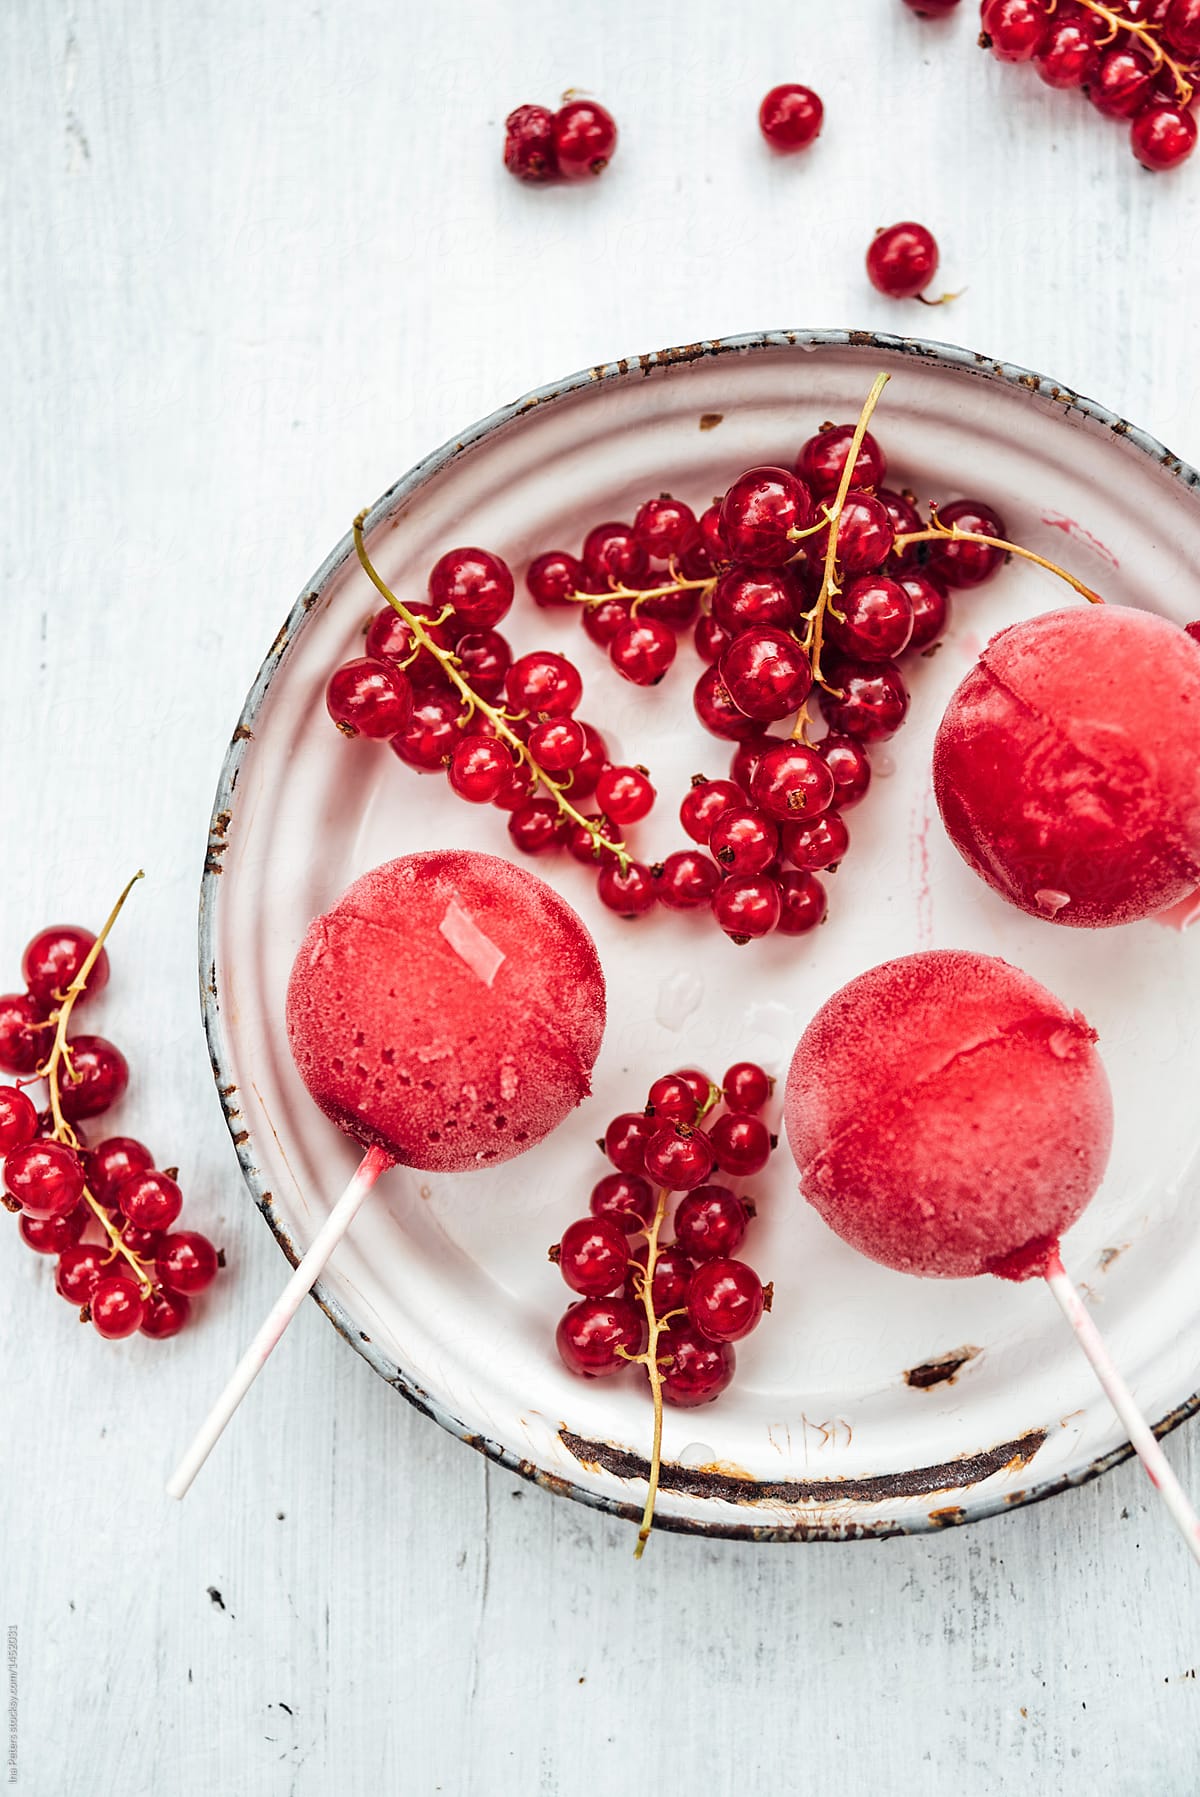 Food: Homemade currant juice popsicles